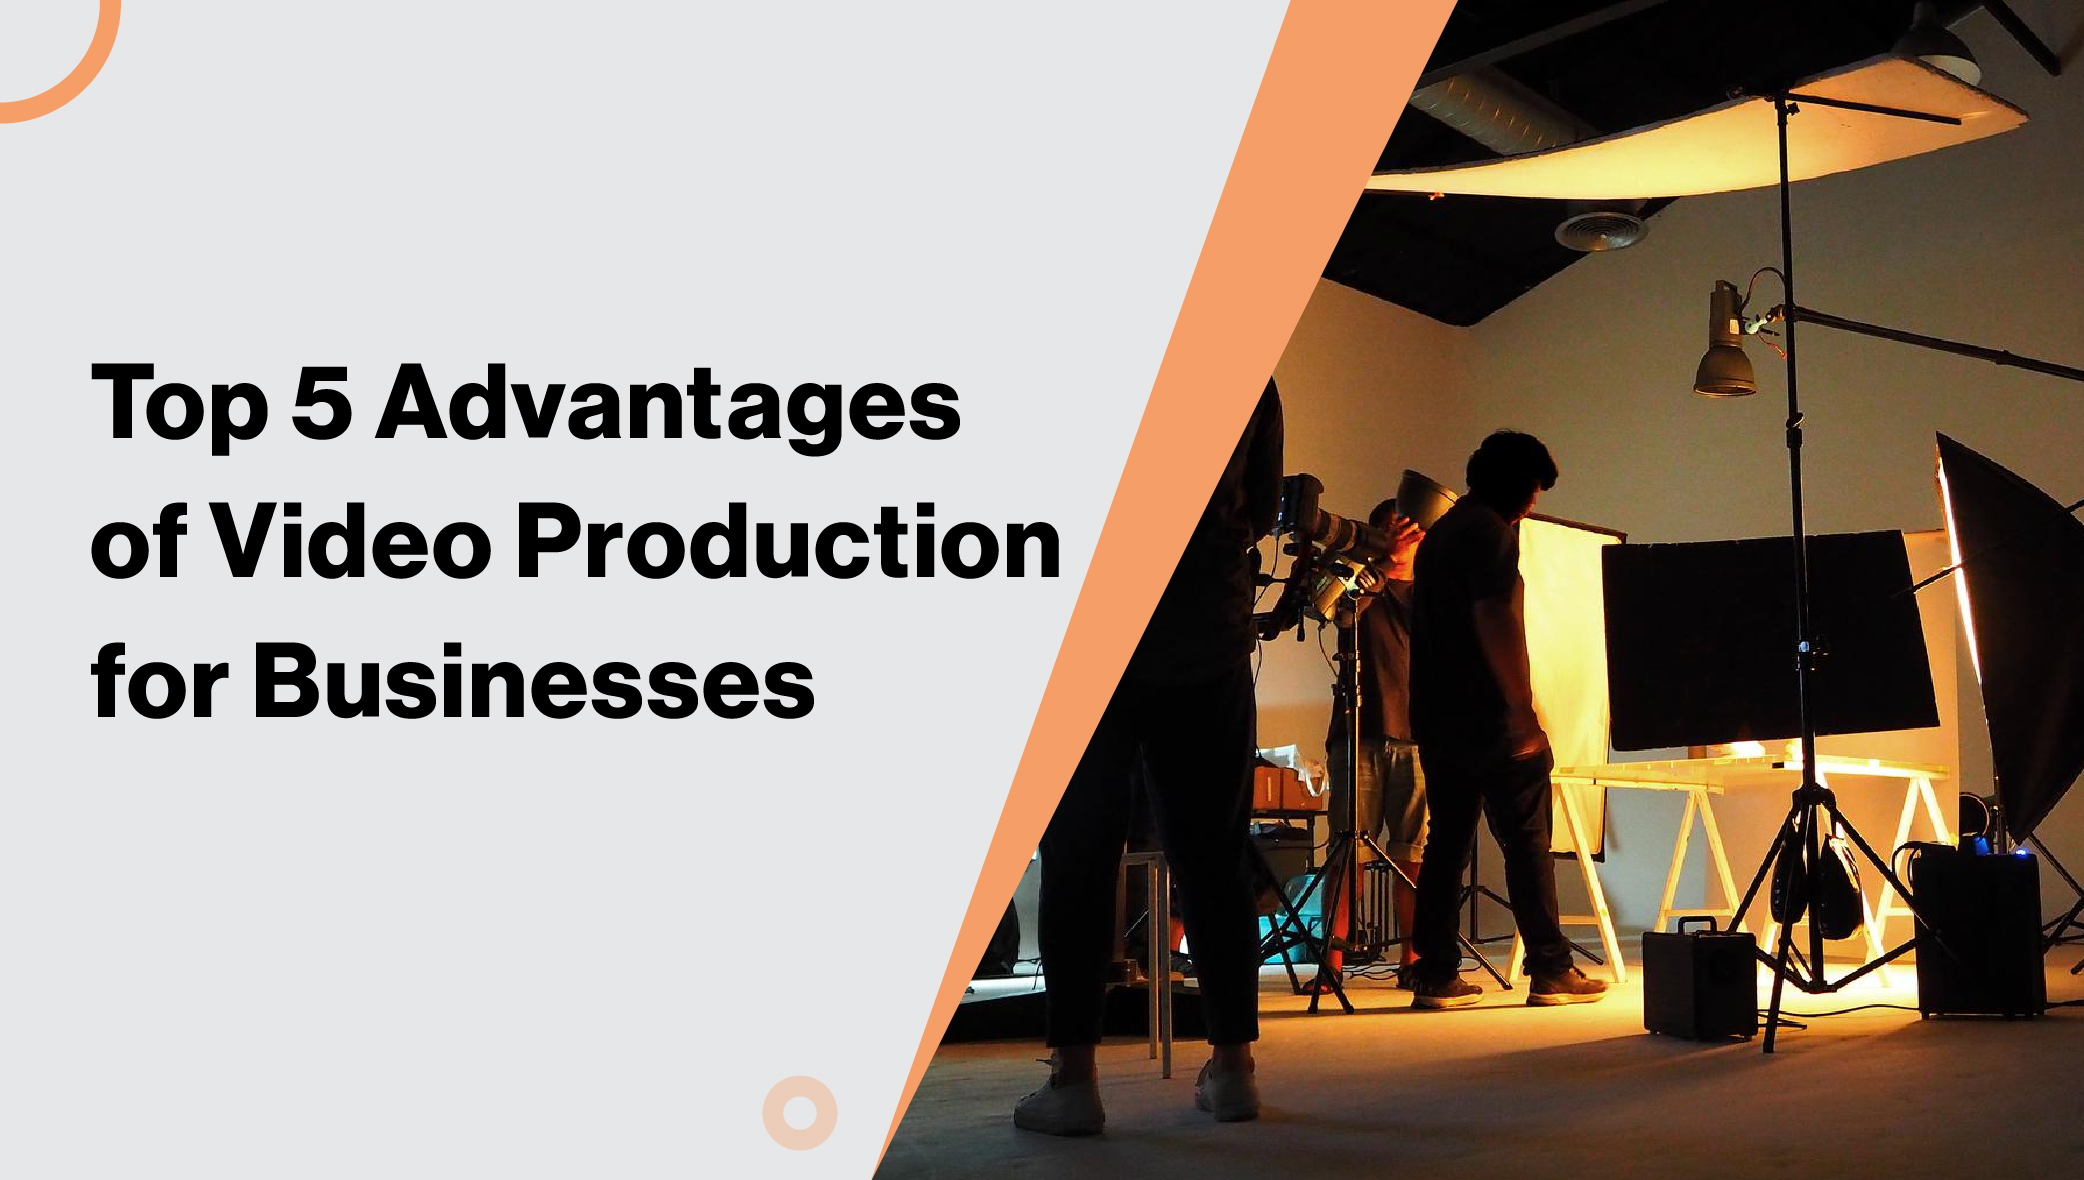 imgpsh fullsize anim 7 - Top 5 Advantages of Video Production for Businesses